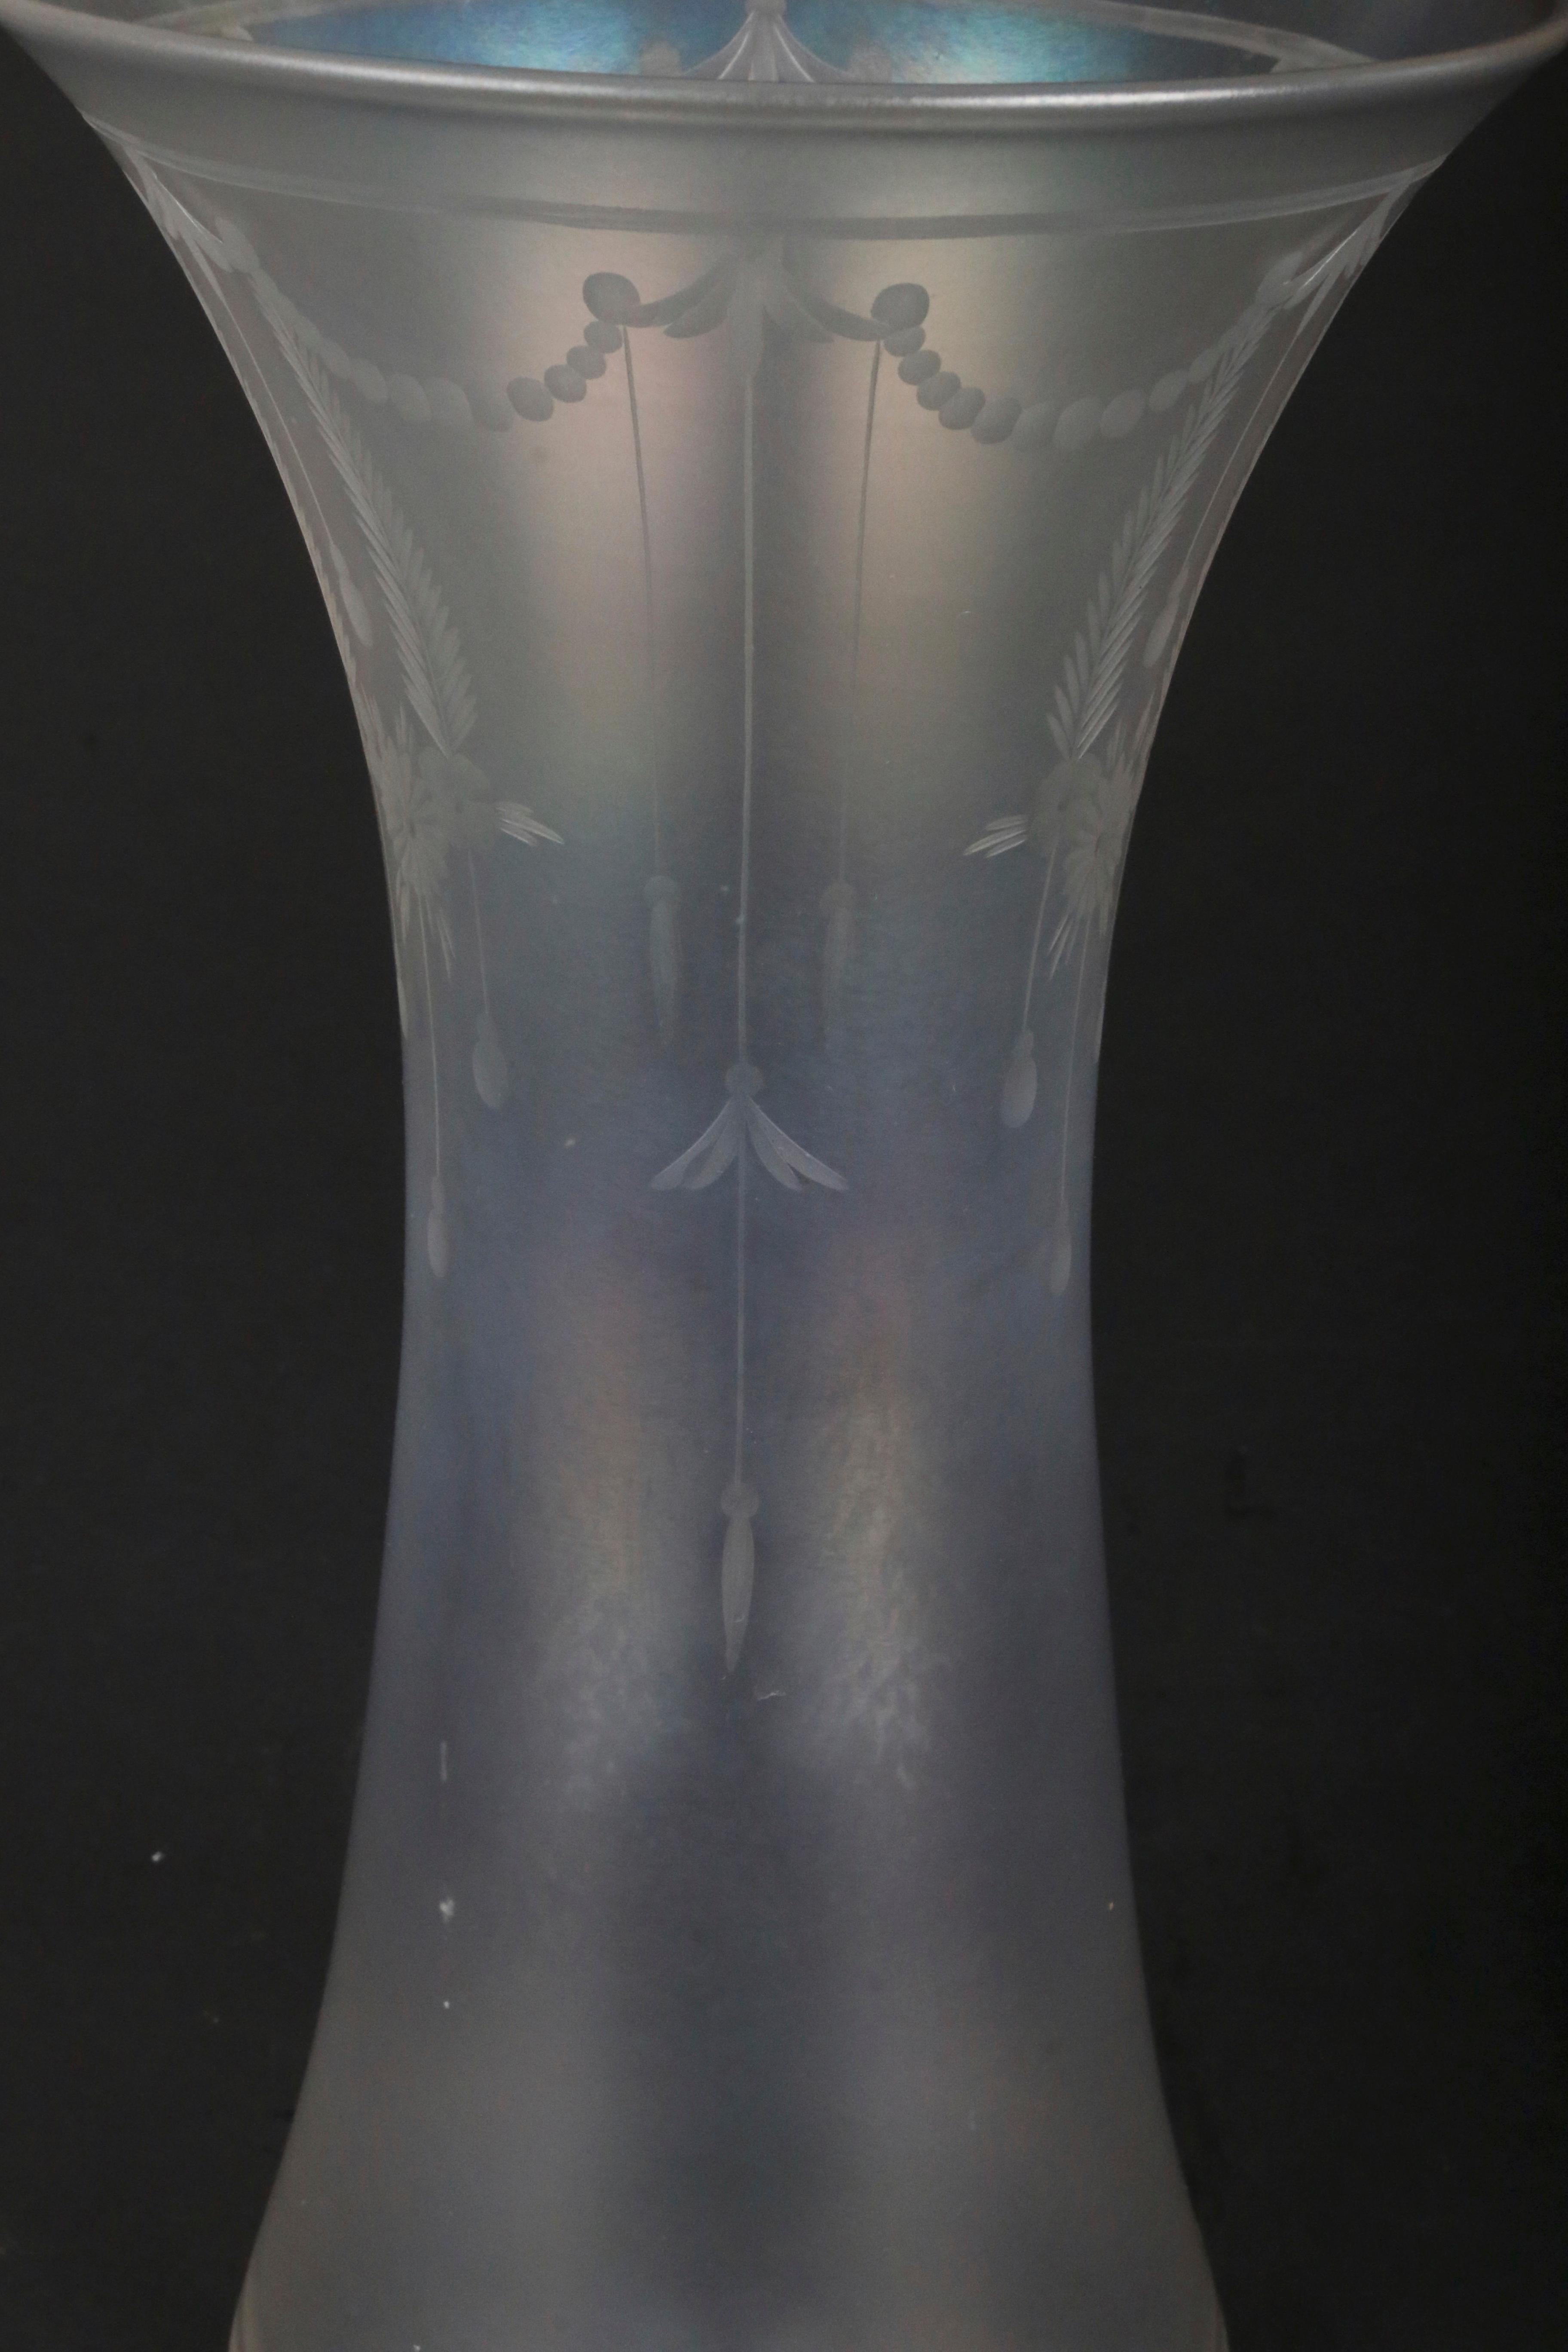 This hourglass shaped vase is made of special iridescent glass called verre de soie or “glass of silk” that was invented by Frederick Carder at Steuben. The Corning Museum of Glass says that 